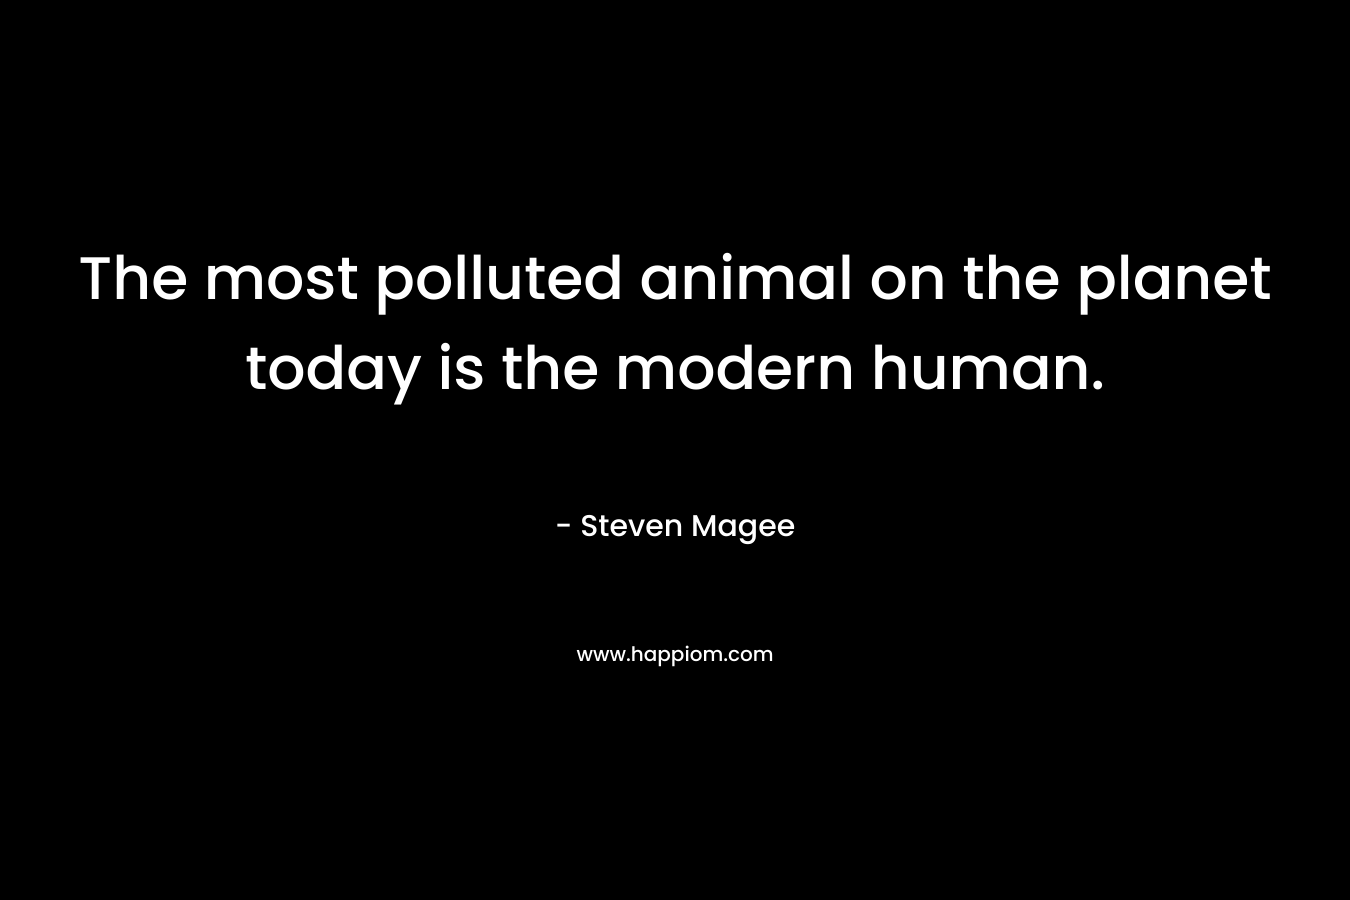 The most polluted animal on the planet today is the modern human. – Steven Magee